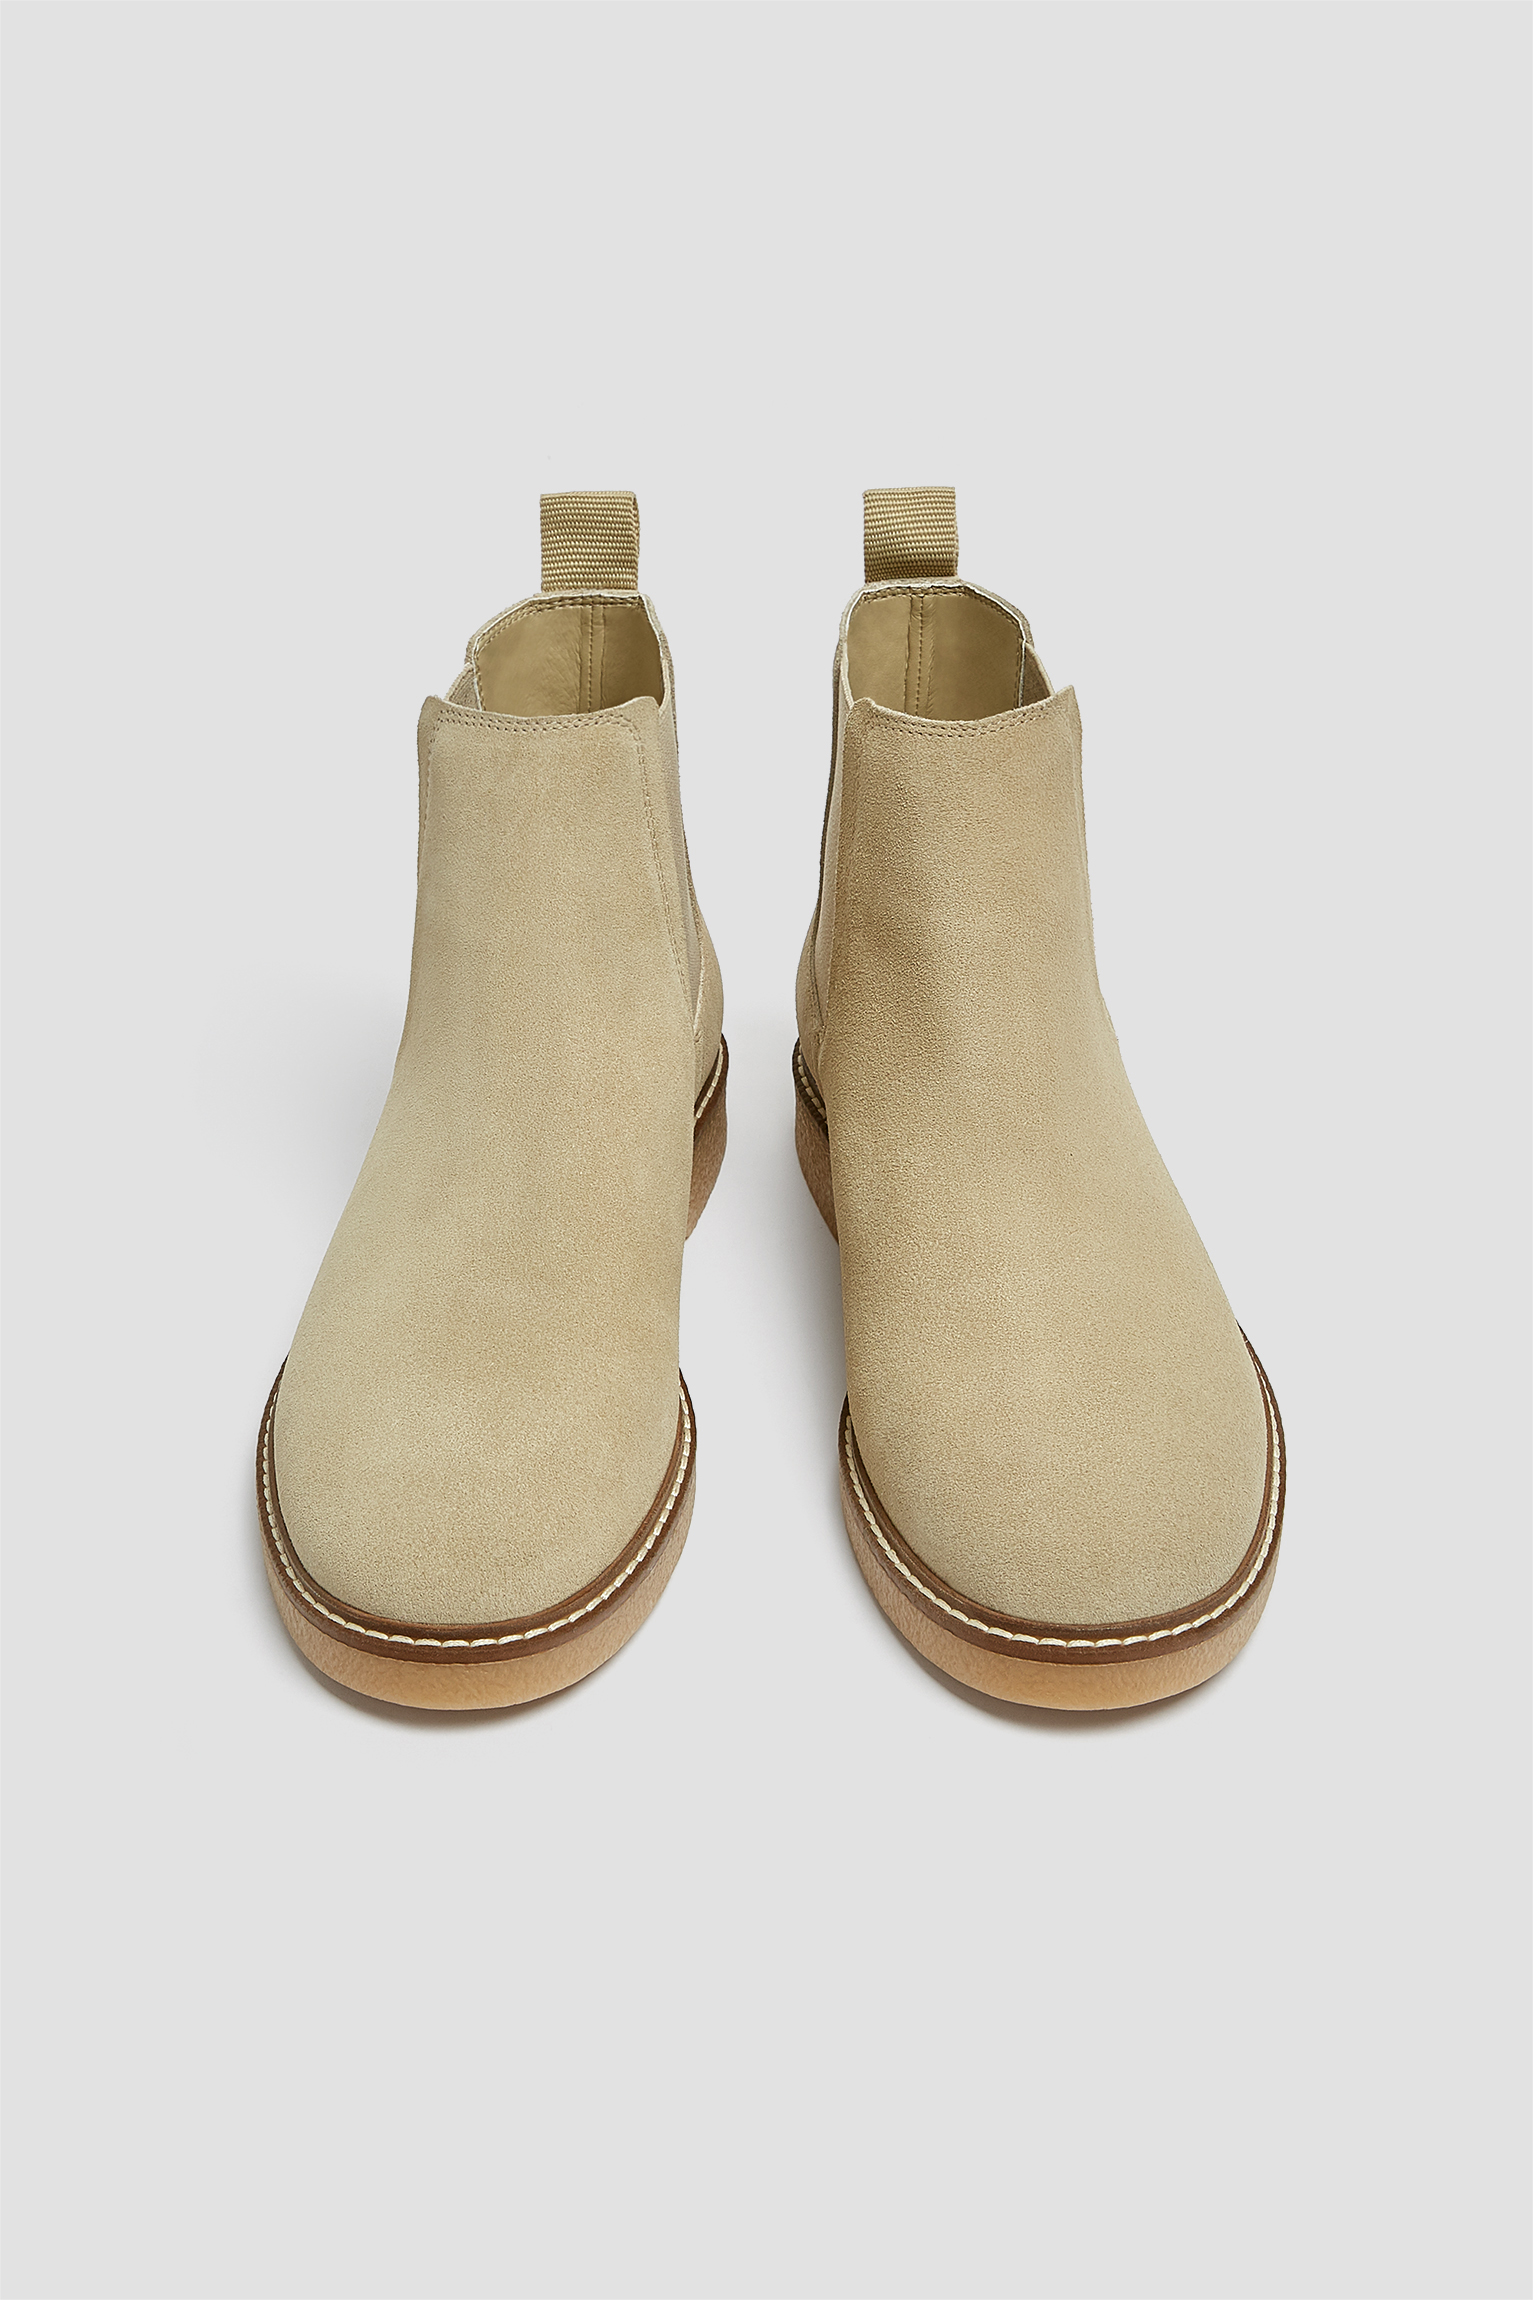 pull and bear chelsea boots